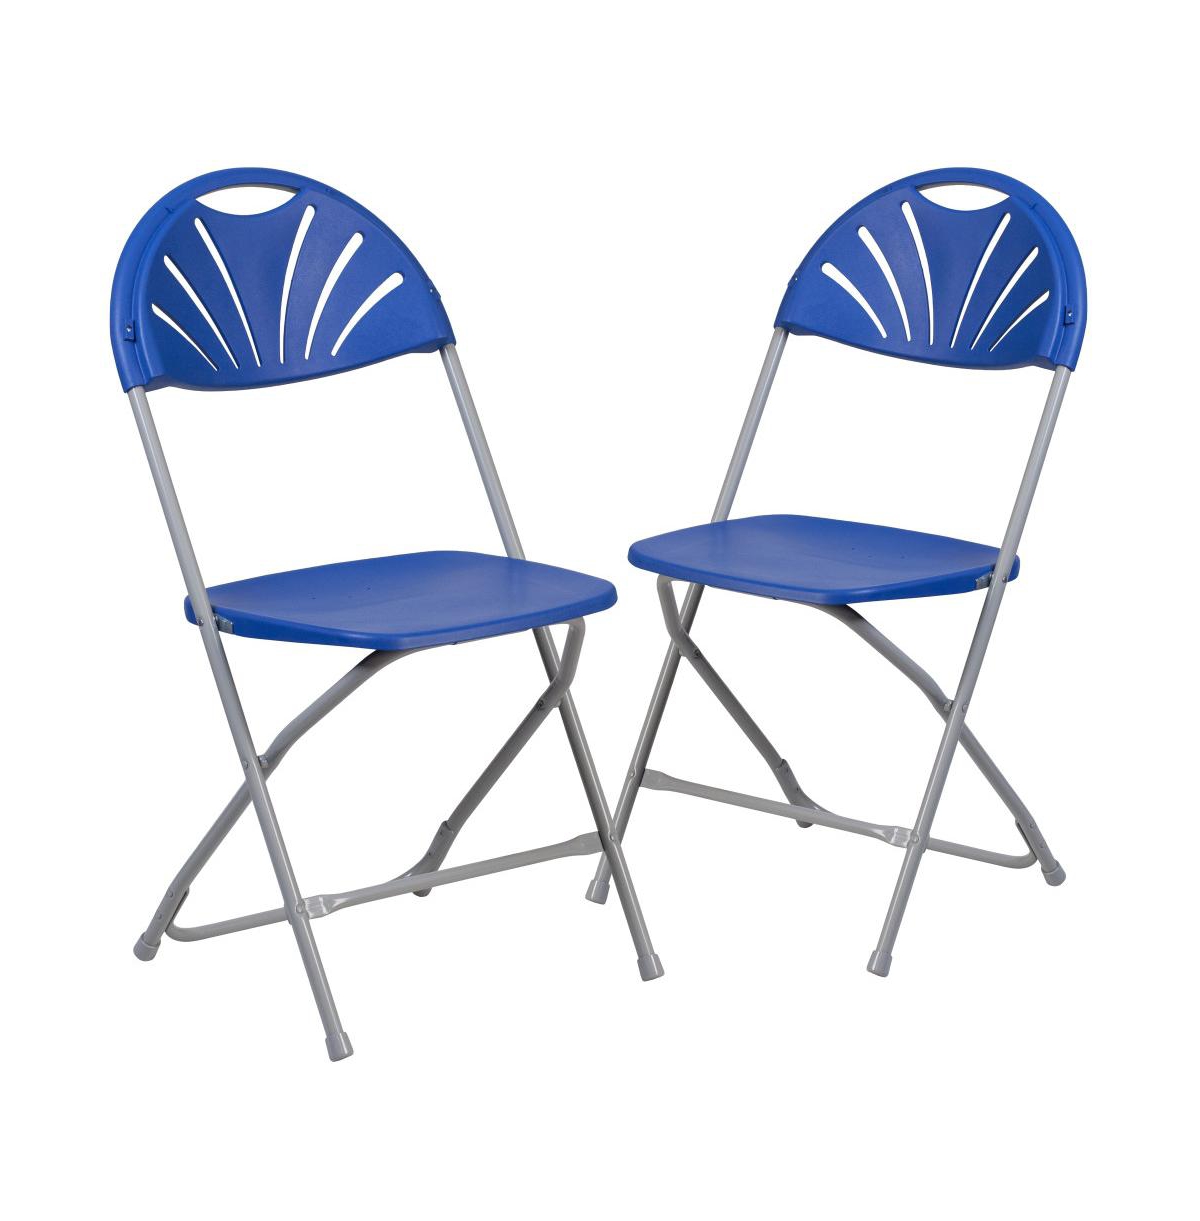 Emma+oliver 2 Pack Wedding Party Event Fan Back Plastic Folding Chair Home Office In Blue